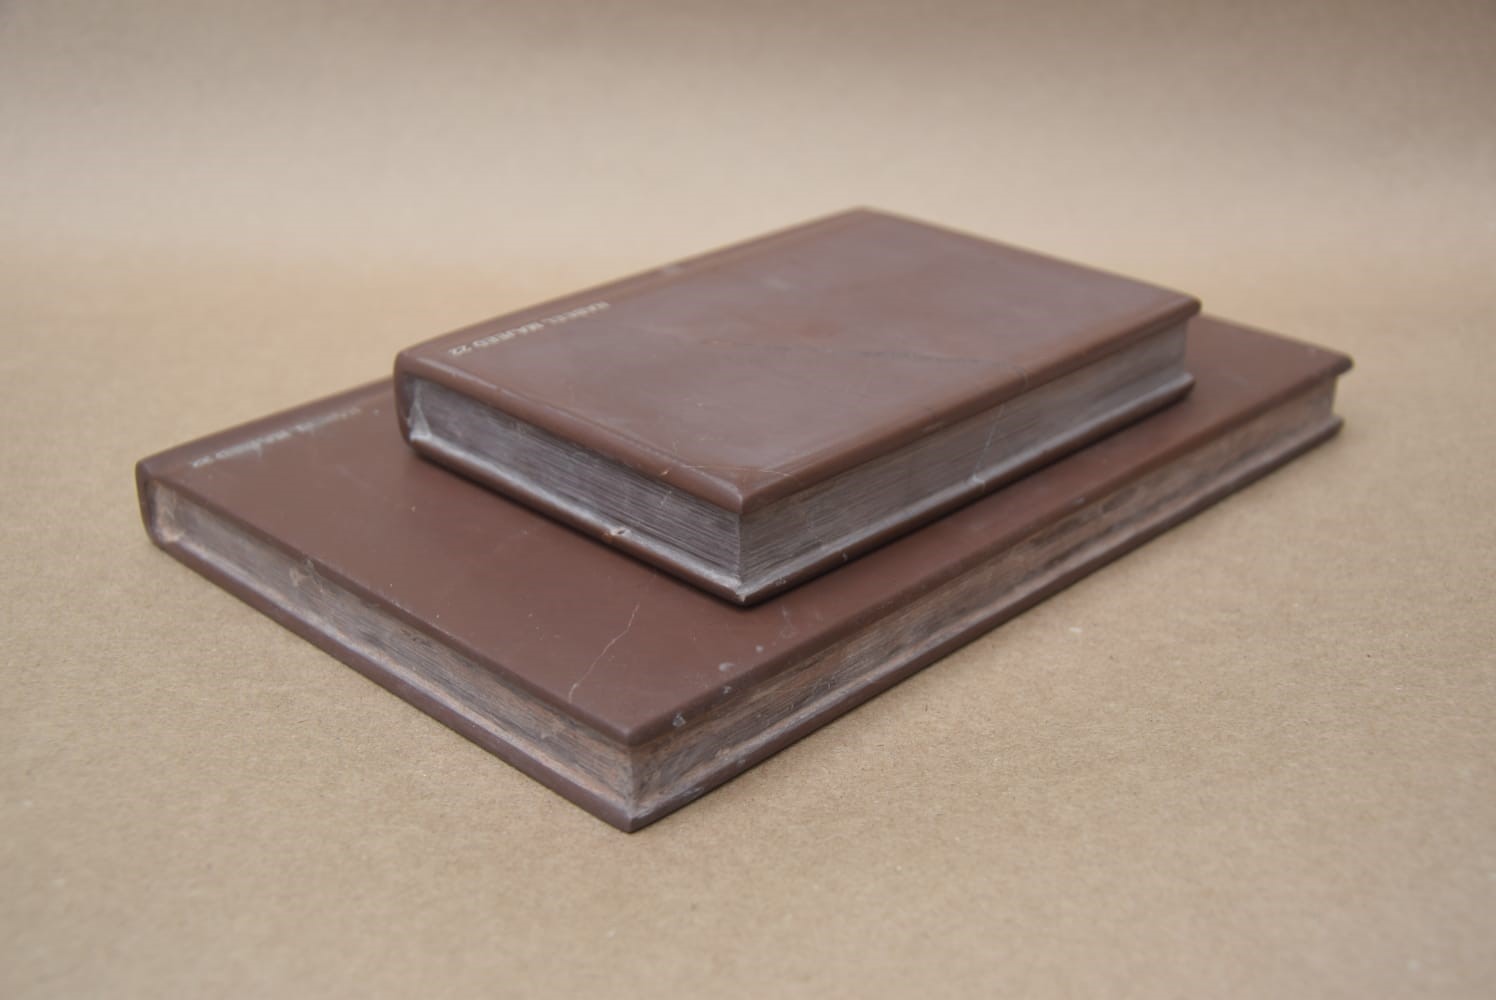 Untitled<br>Medium: Marble carving <br> Size: Chocolate Brown 6 x 4.3 x 0.6 inches,<br>  Chocolate brown 9 x 6 x 0.6 inches